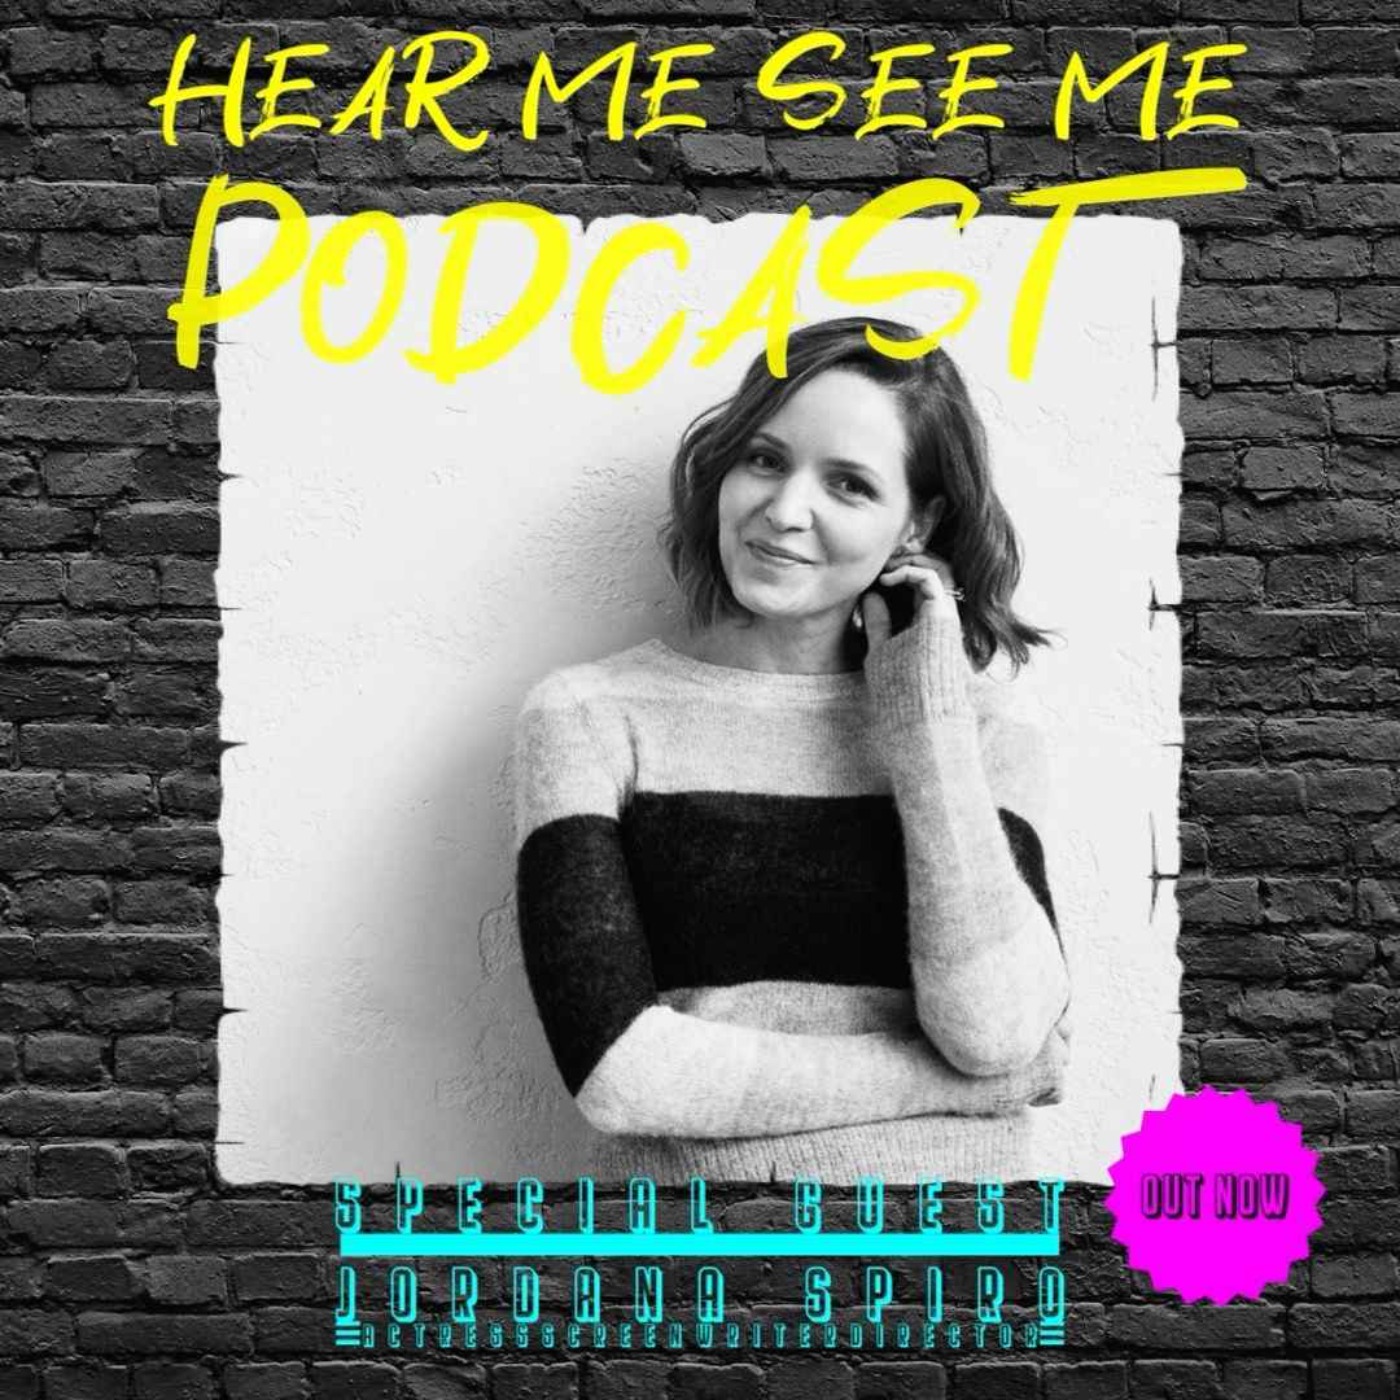 cover art for Hear Me, See Me Podcast with Actress, Screenwriter and Director, Jordana Spiro.